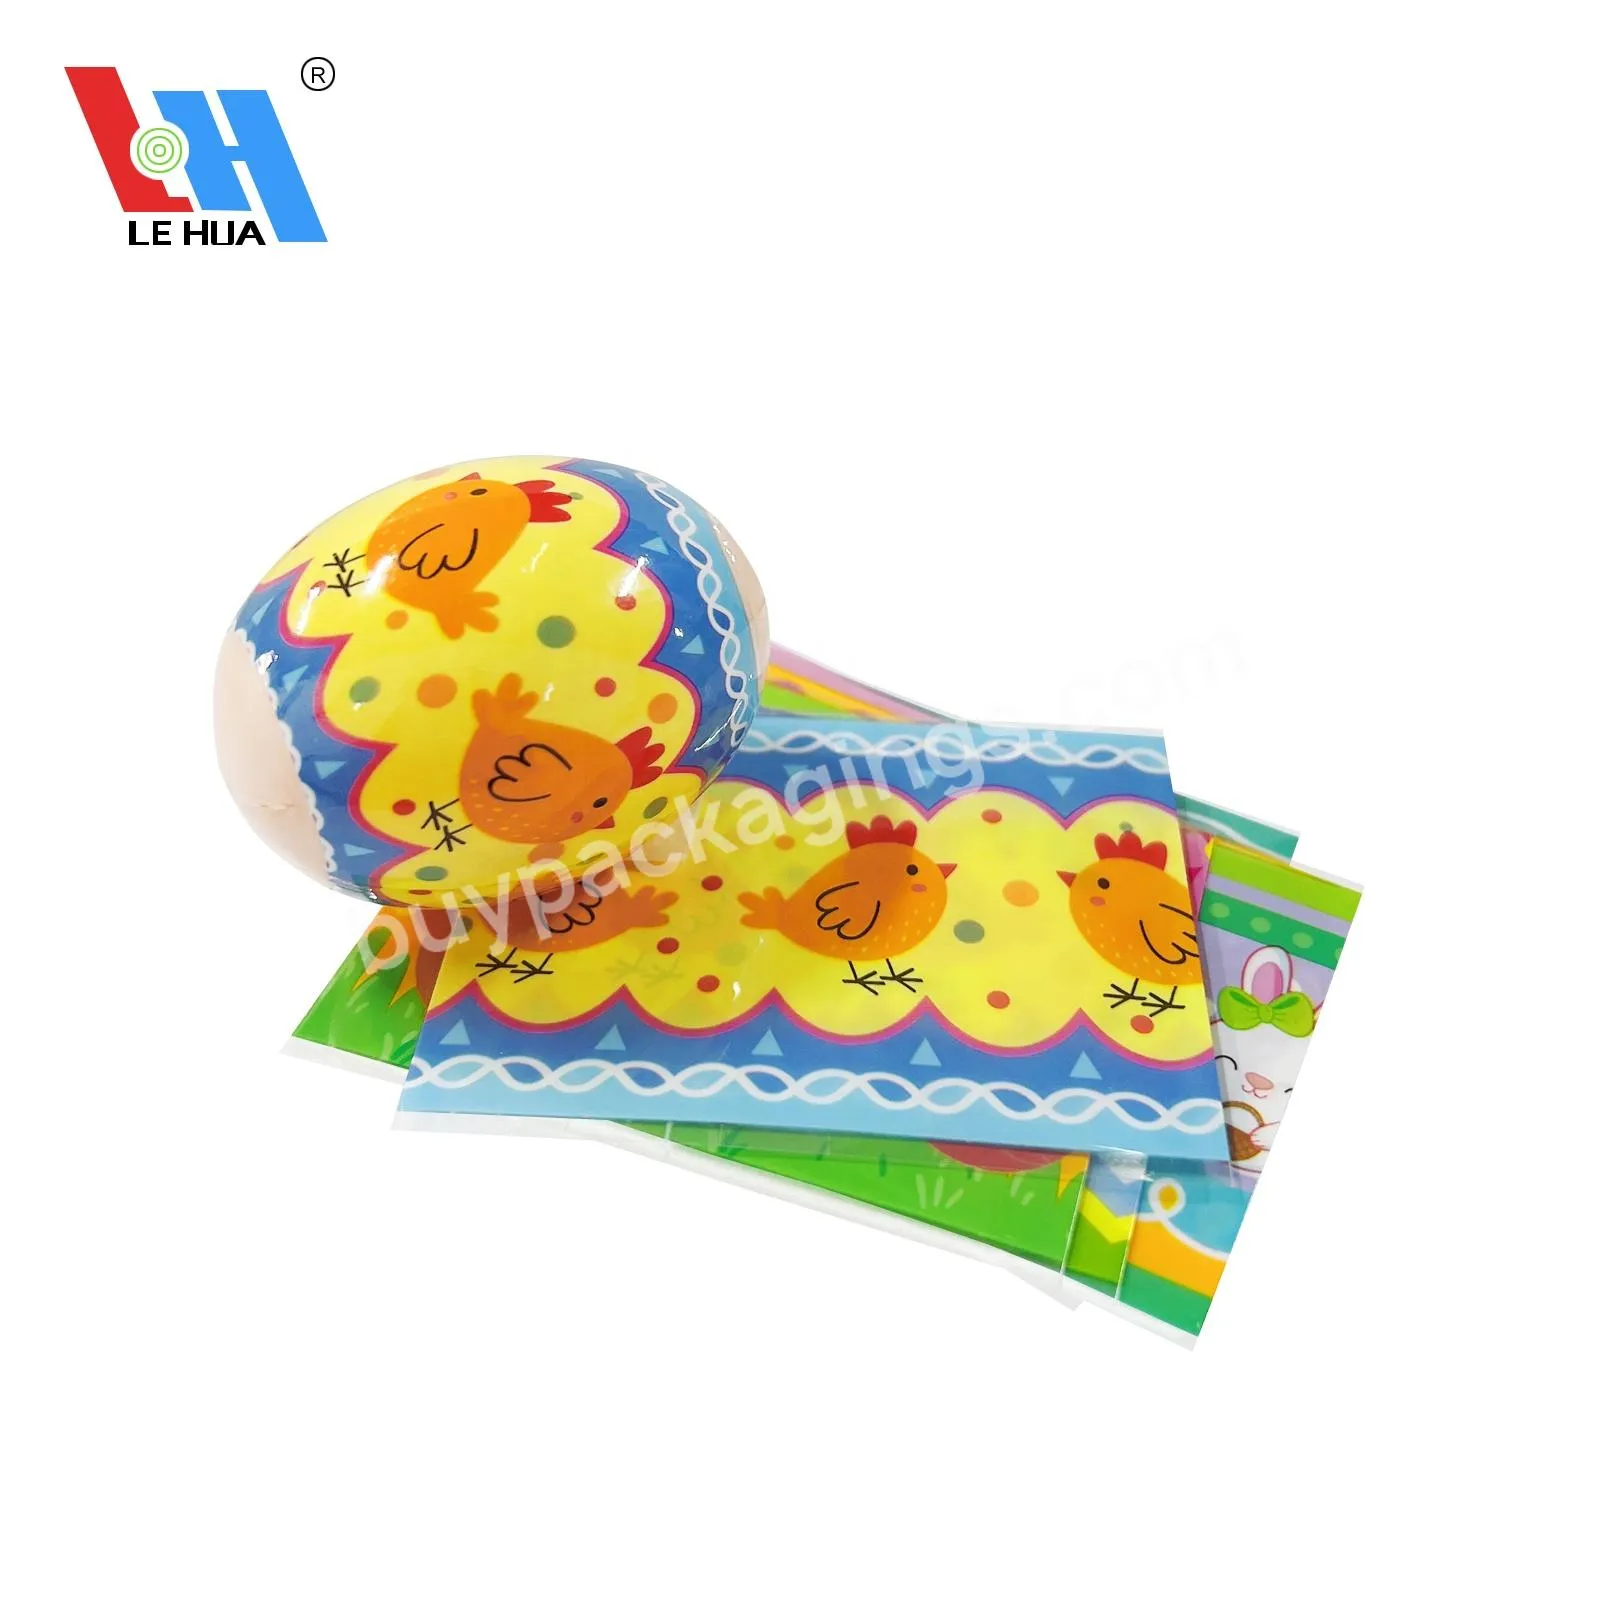 Thermo Heat Shrink Sleeve Decoration Easter Egg Wraps - Buy Pvc Shrink Sleeves,Shrink Wrap For Joy Eggs,Pet Shrink Wraps.